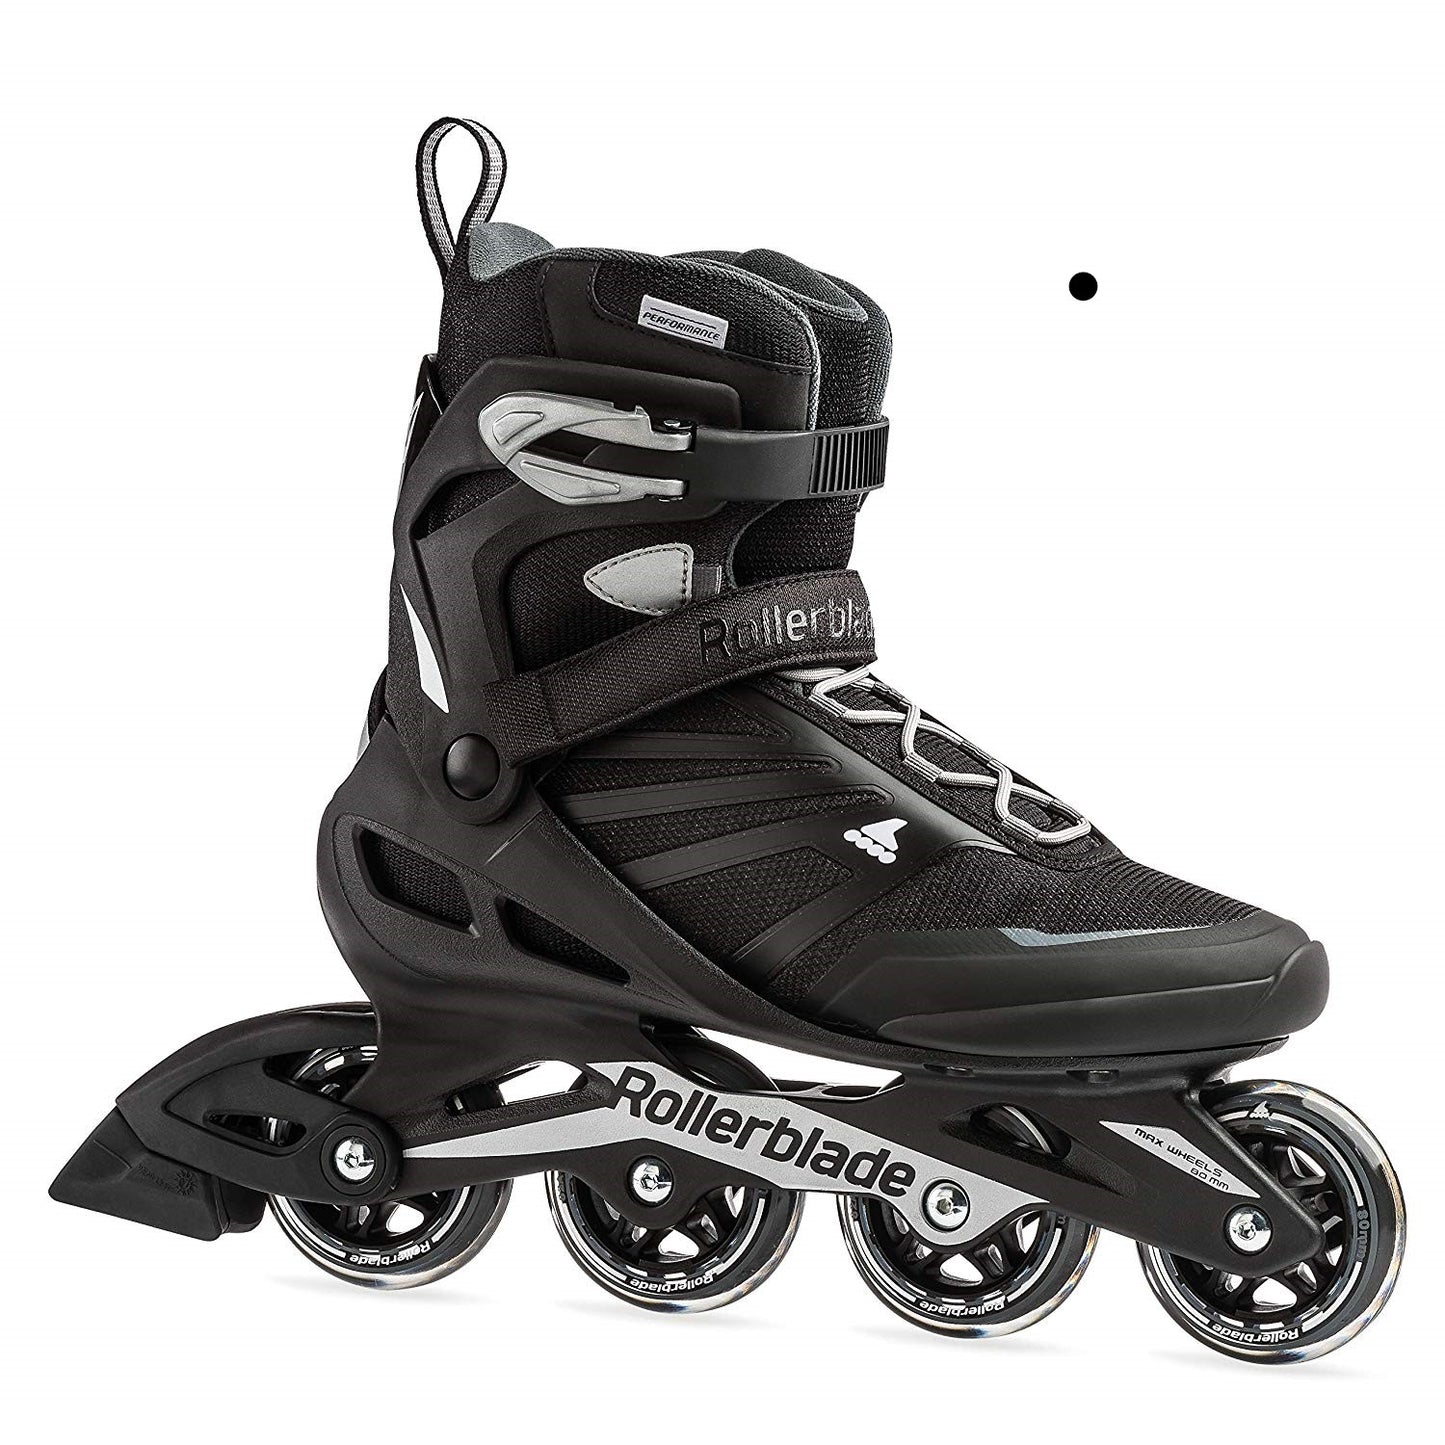 Rollerblade Zetrablade Mens Adult Fitness Inline Skate, Black/Silver, 7 - Open Box  - (Without Original Box)